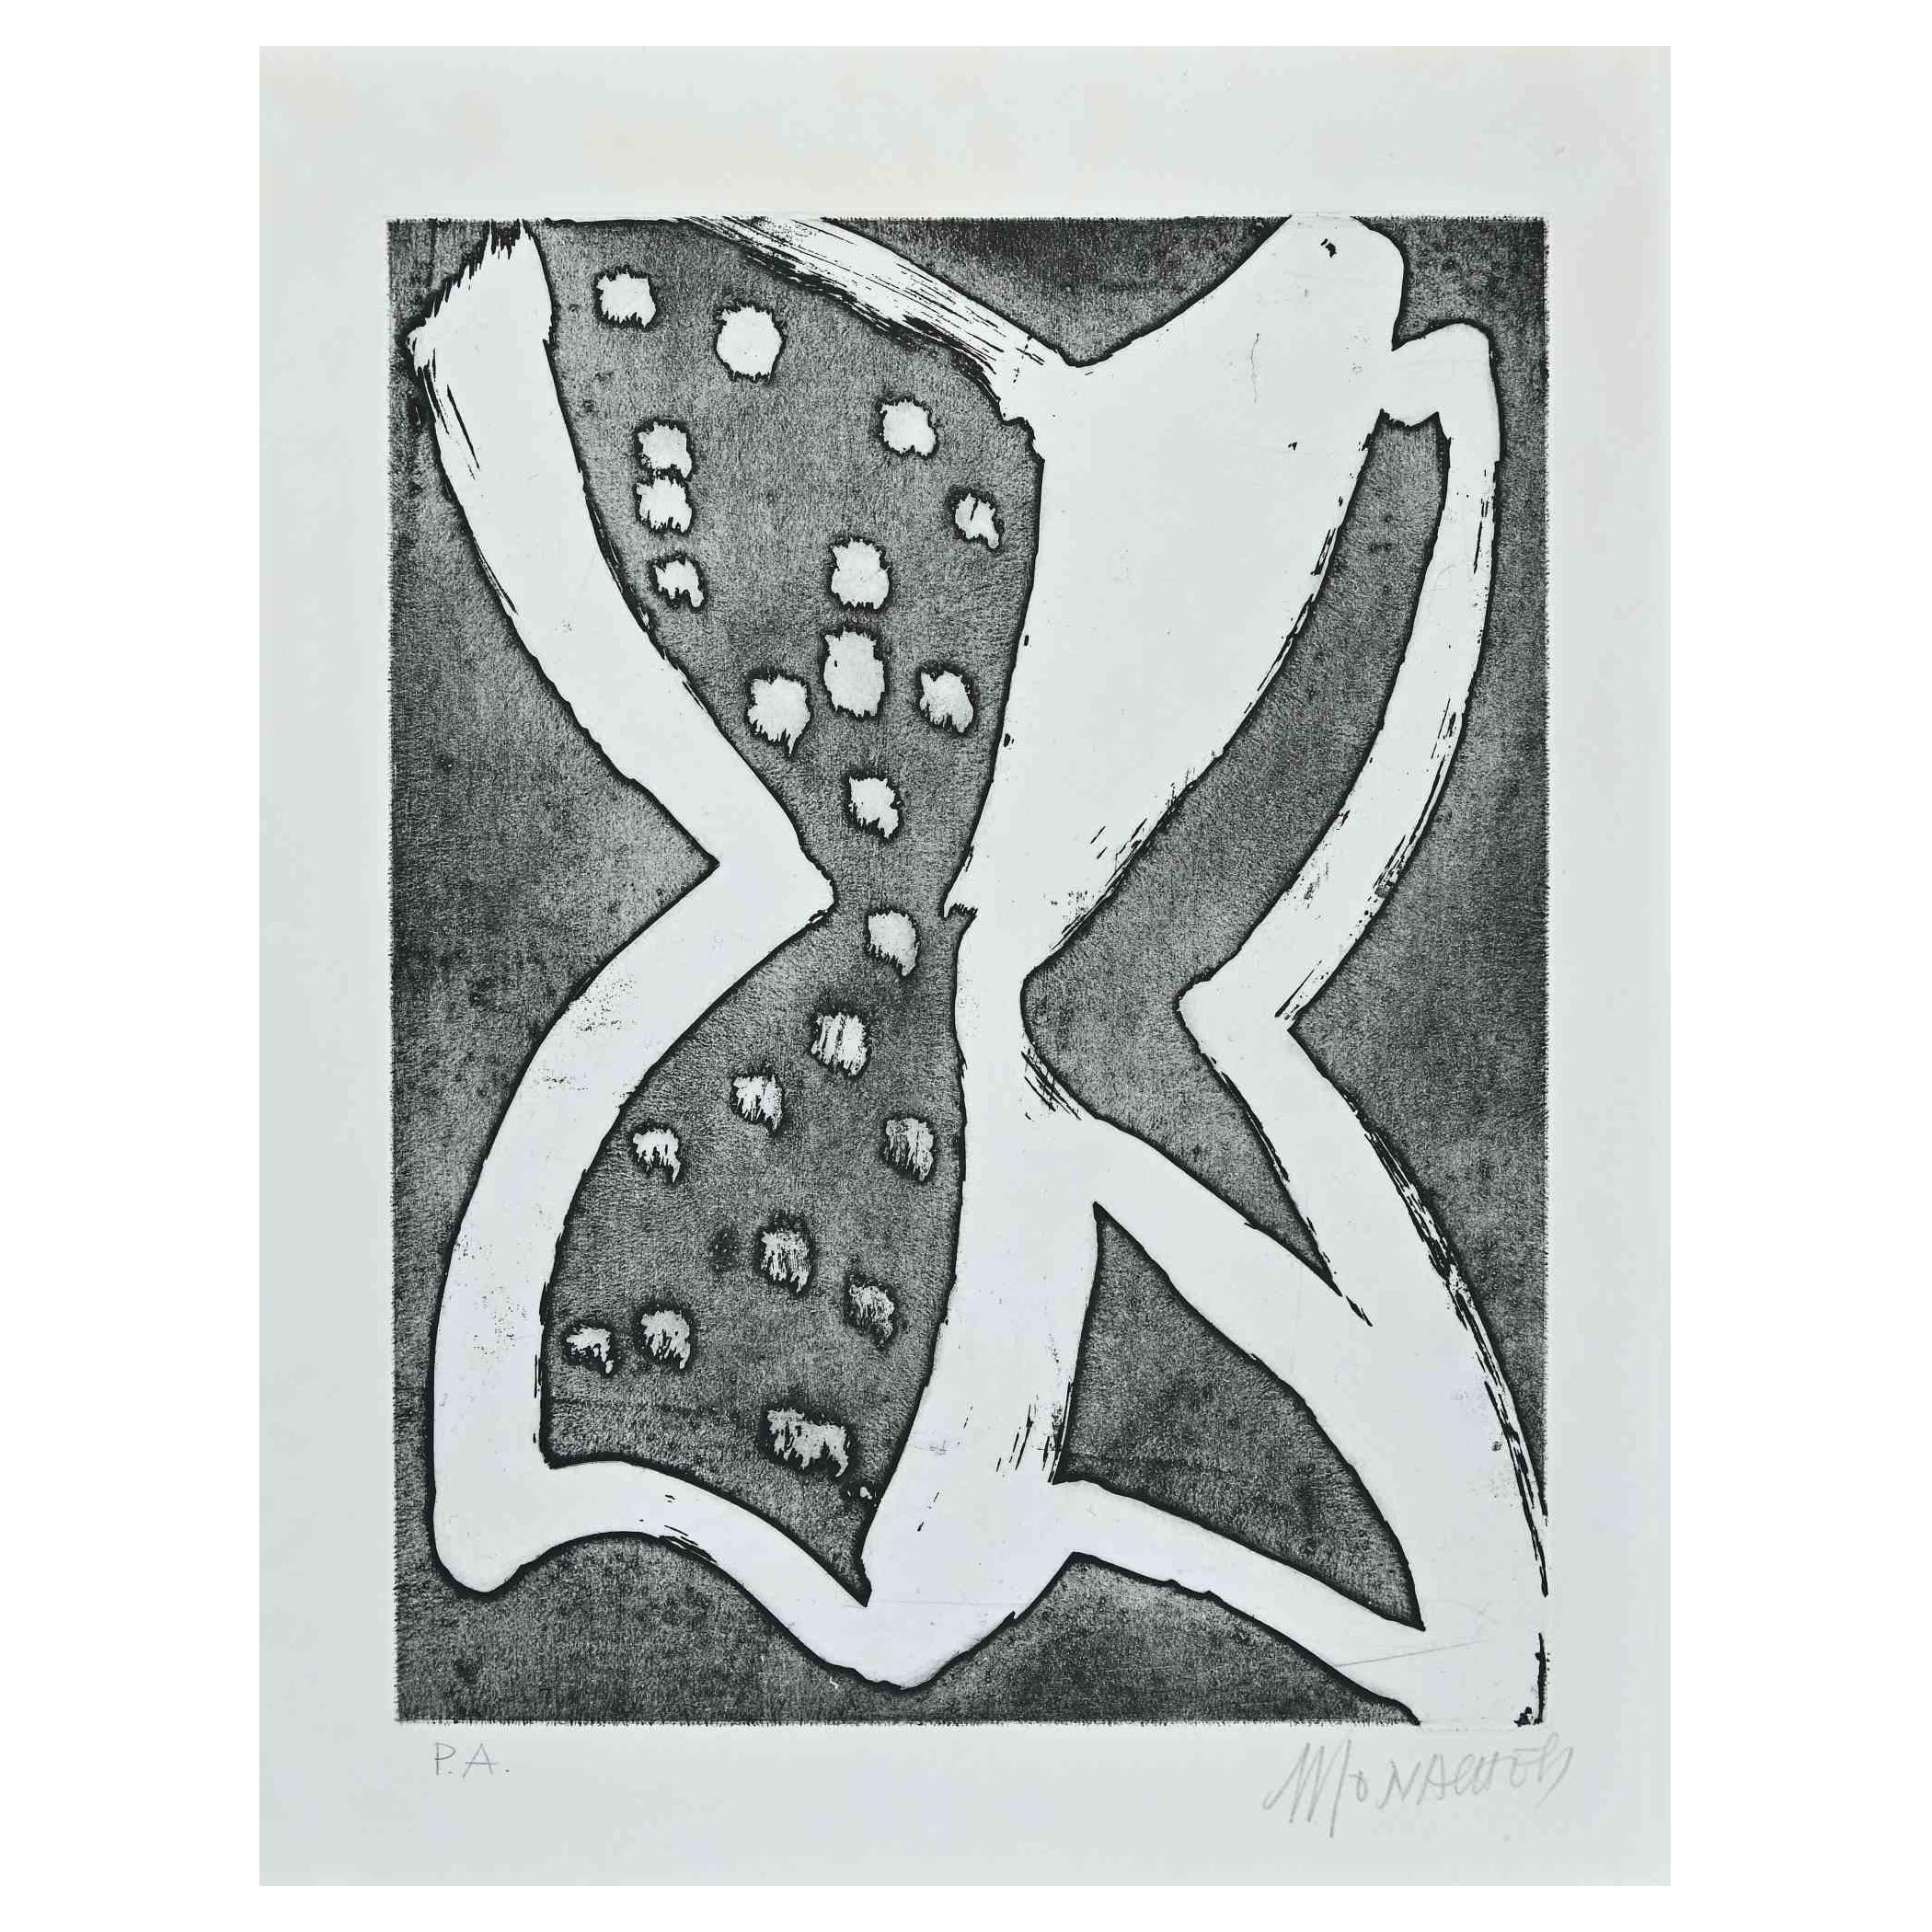 The Butterfly is an original etching artwork on paper realized by Sante Monachesi.

Hand-signed on the lower right by pencil. Artist Proof.

it is an artist's proofs edition on the lower left.

Very good conditions.

The artwork is created in